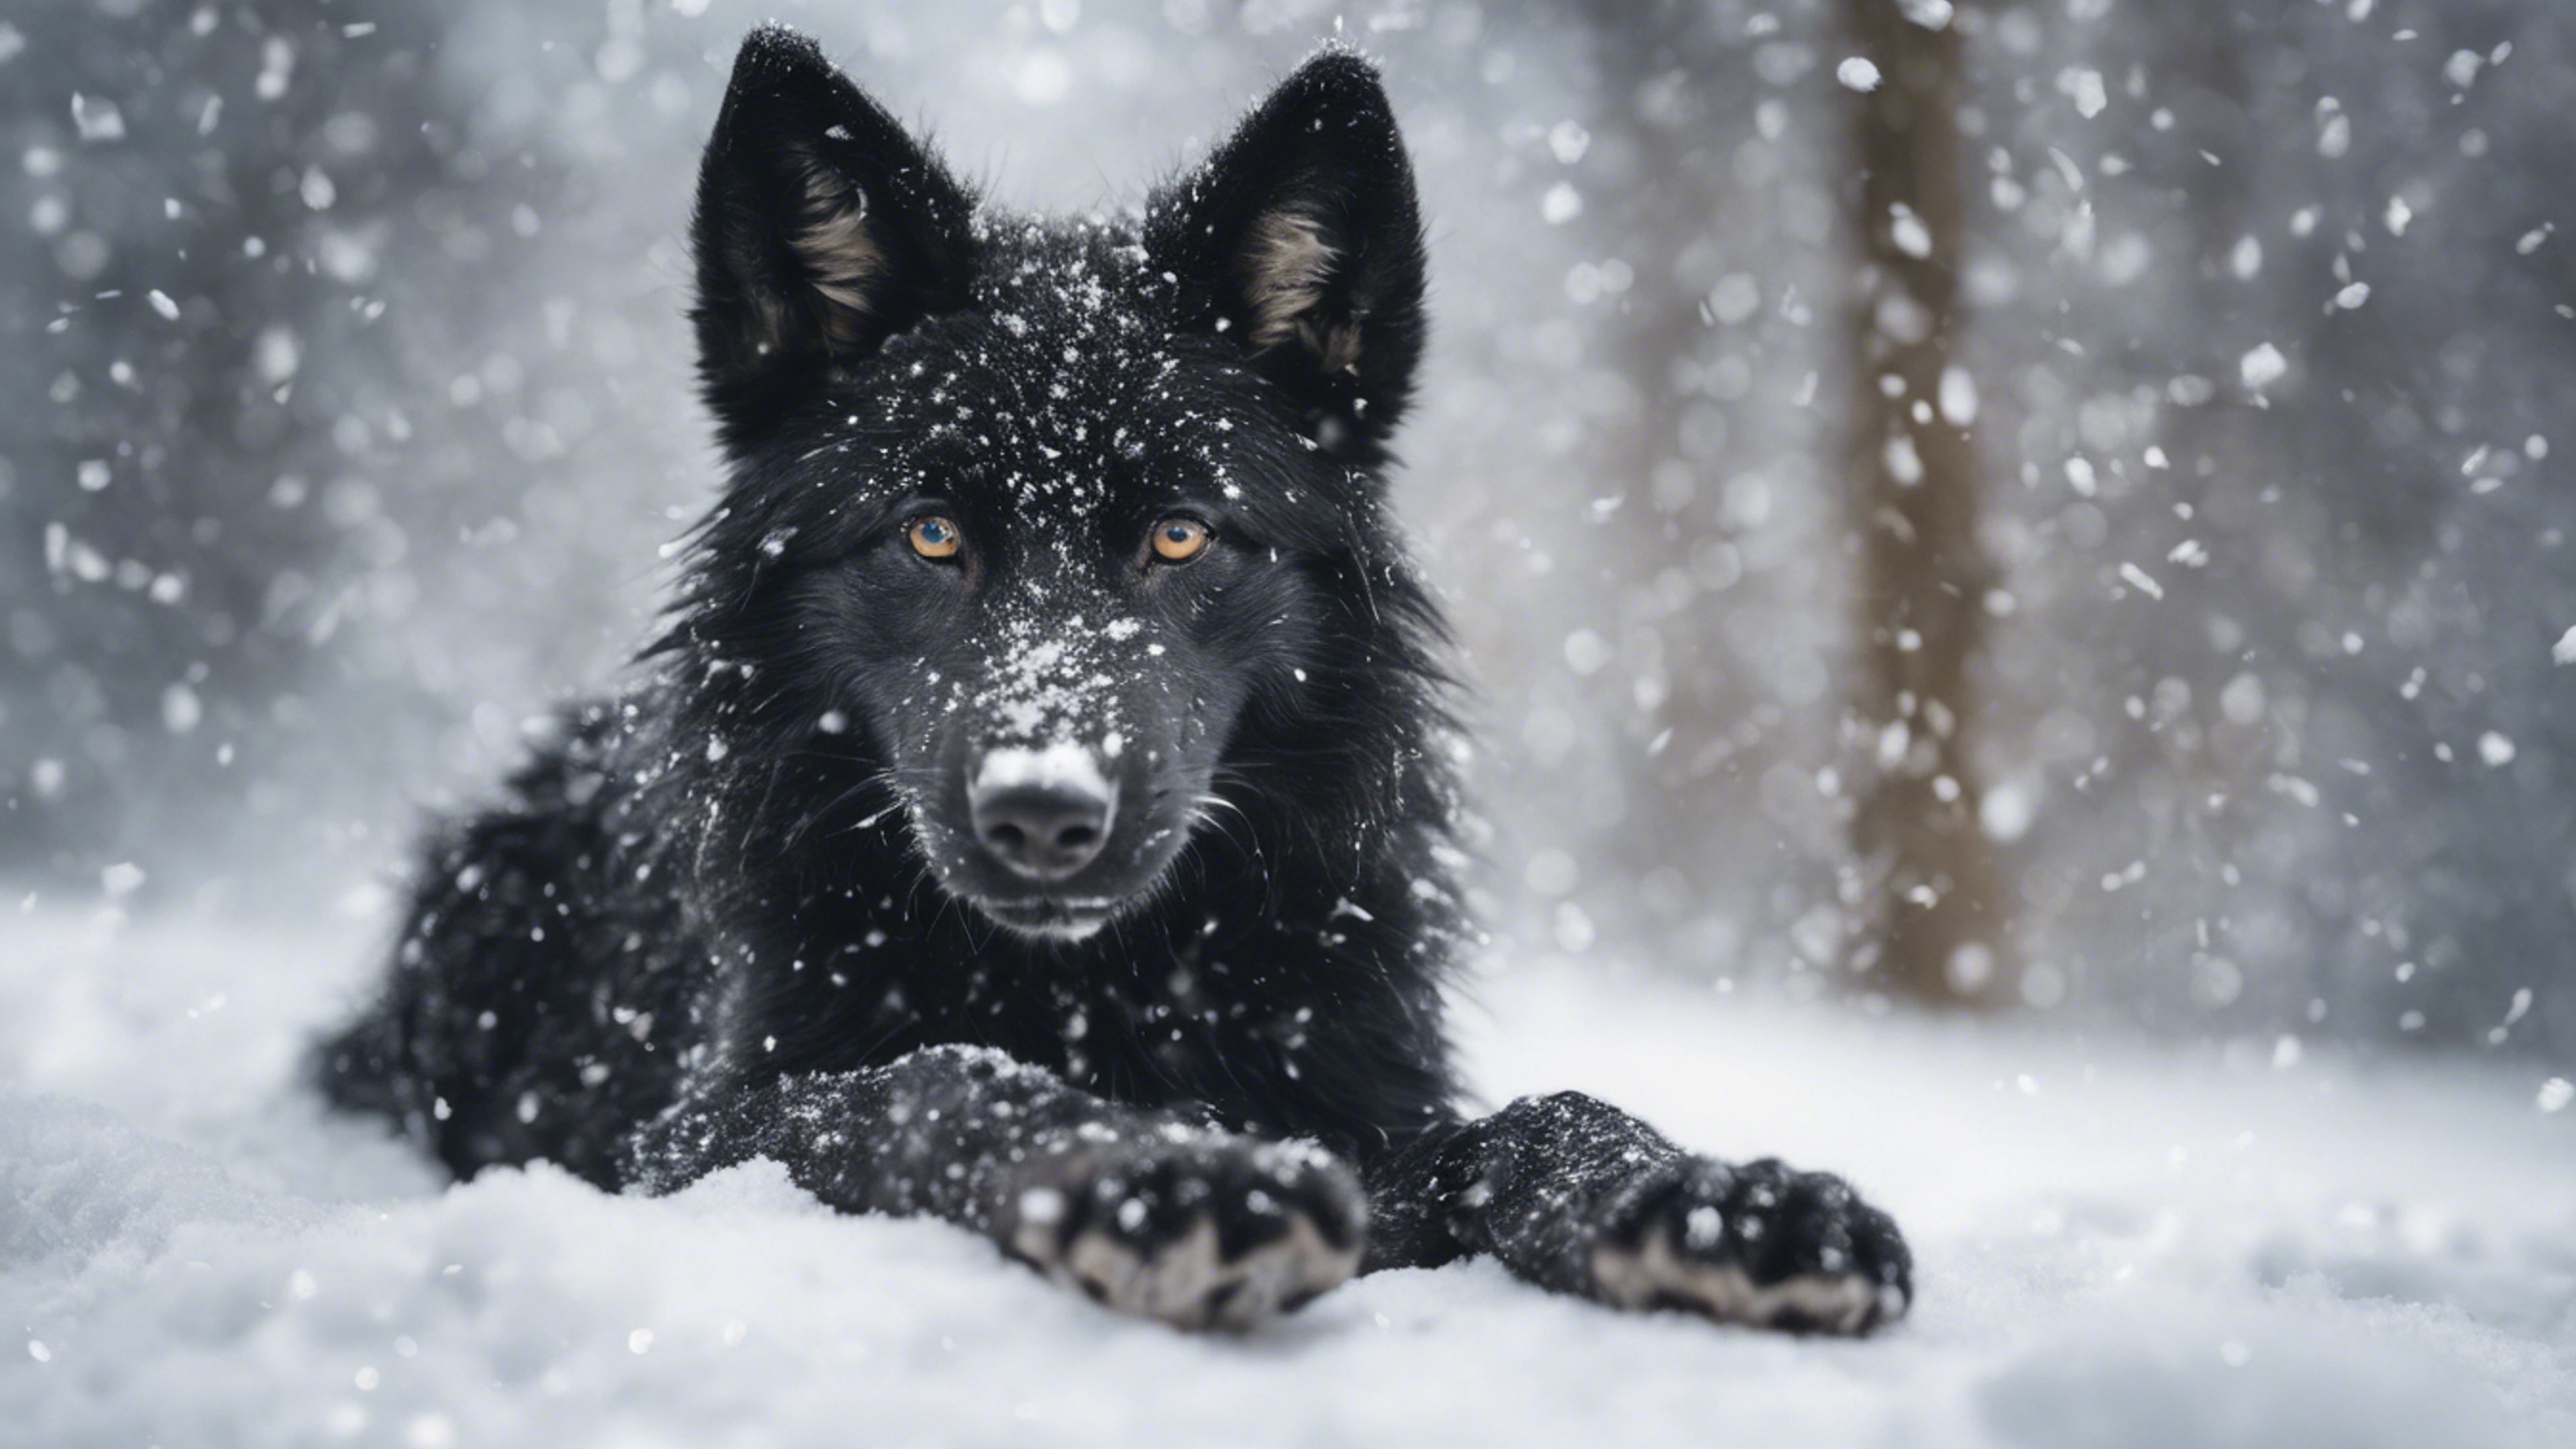 A playful black wolf puppy making the first snow angel of its life. Papel de parede[6a2907d16c81420c9dae]